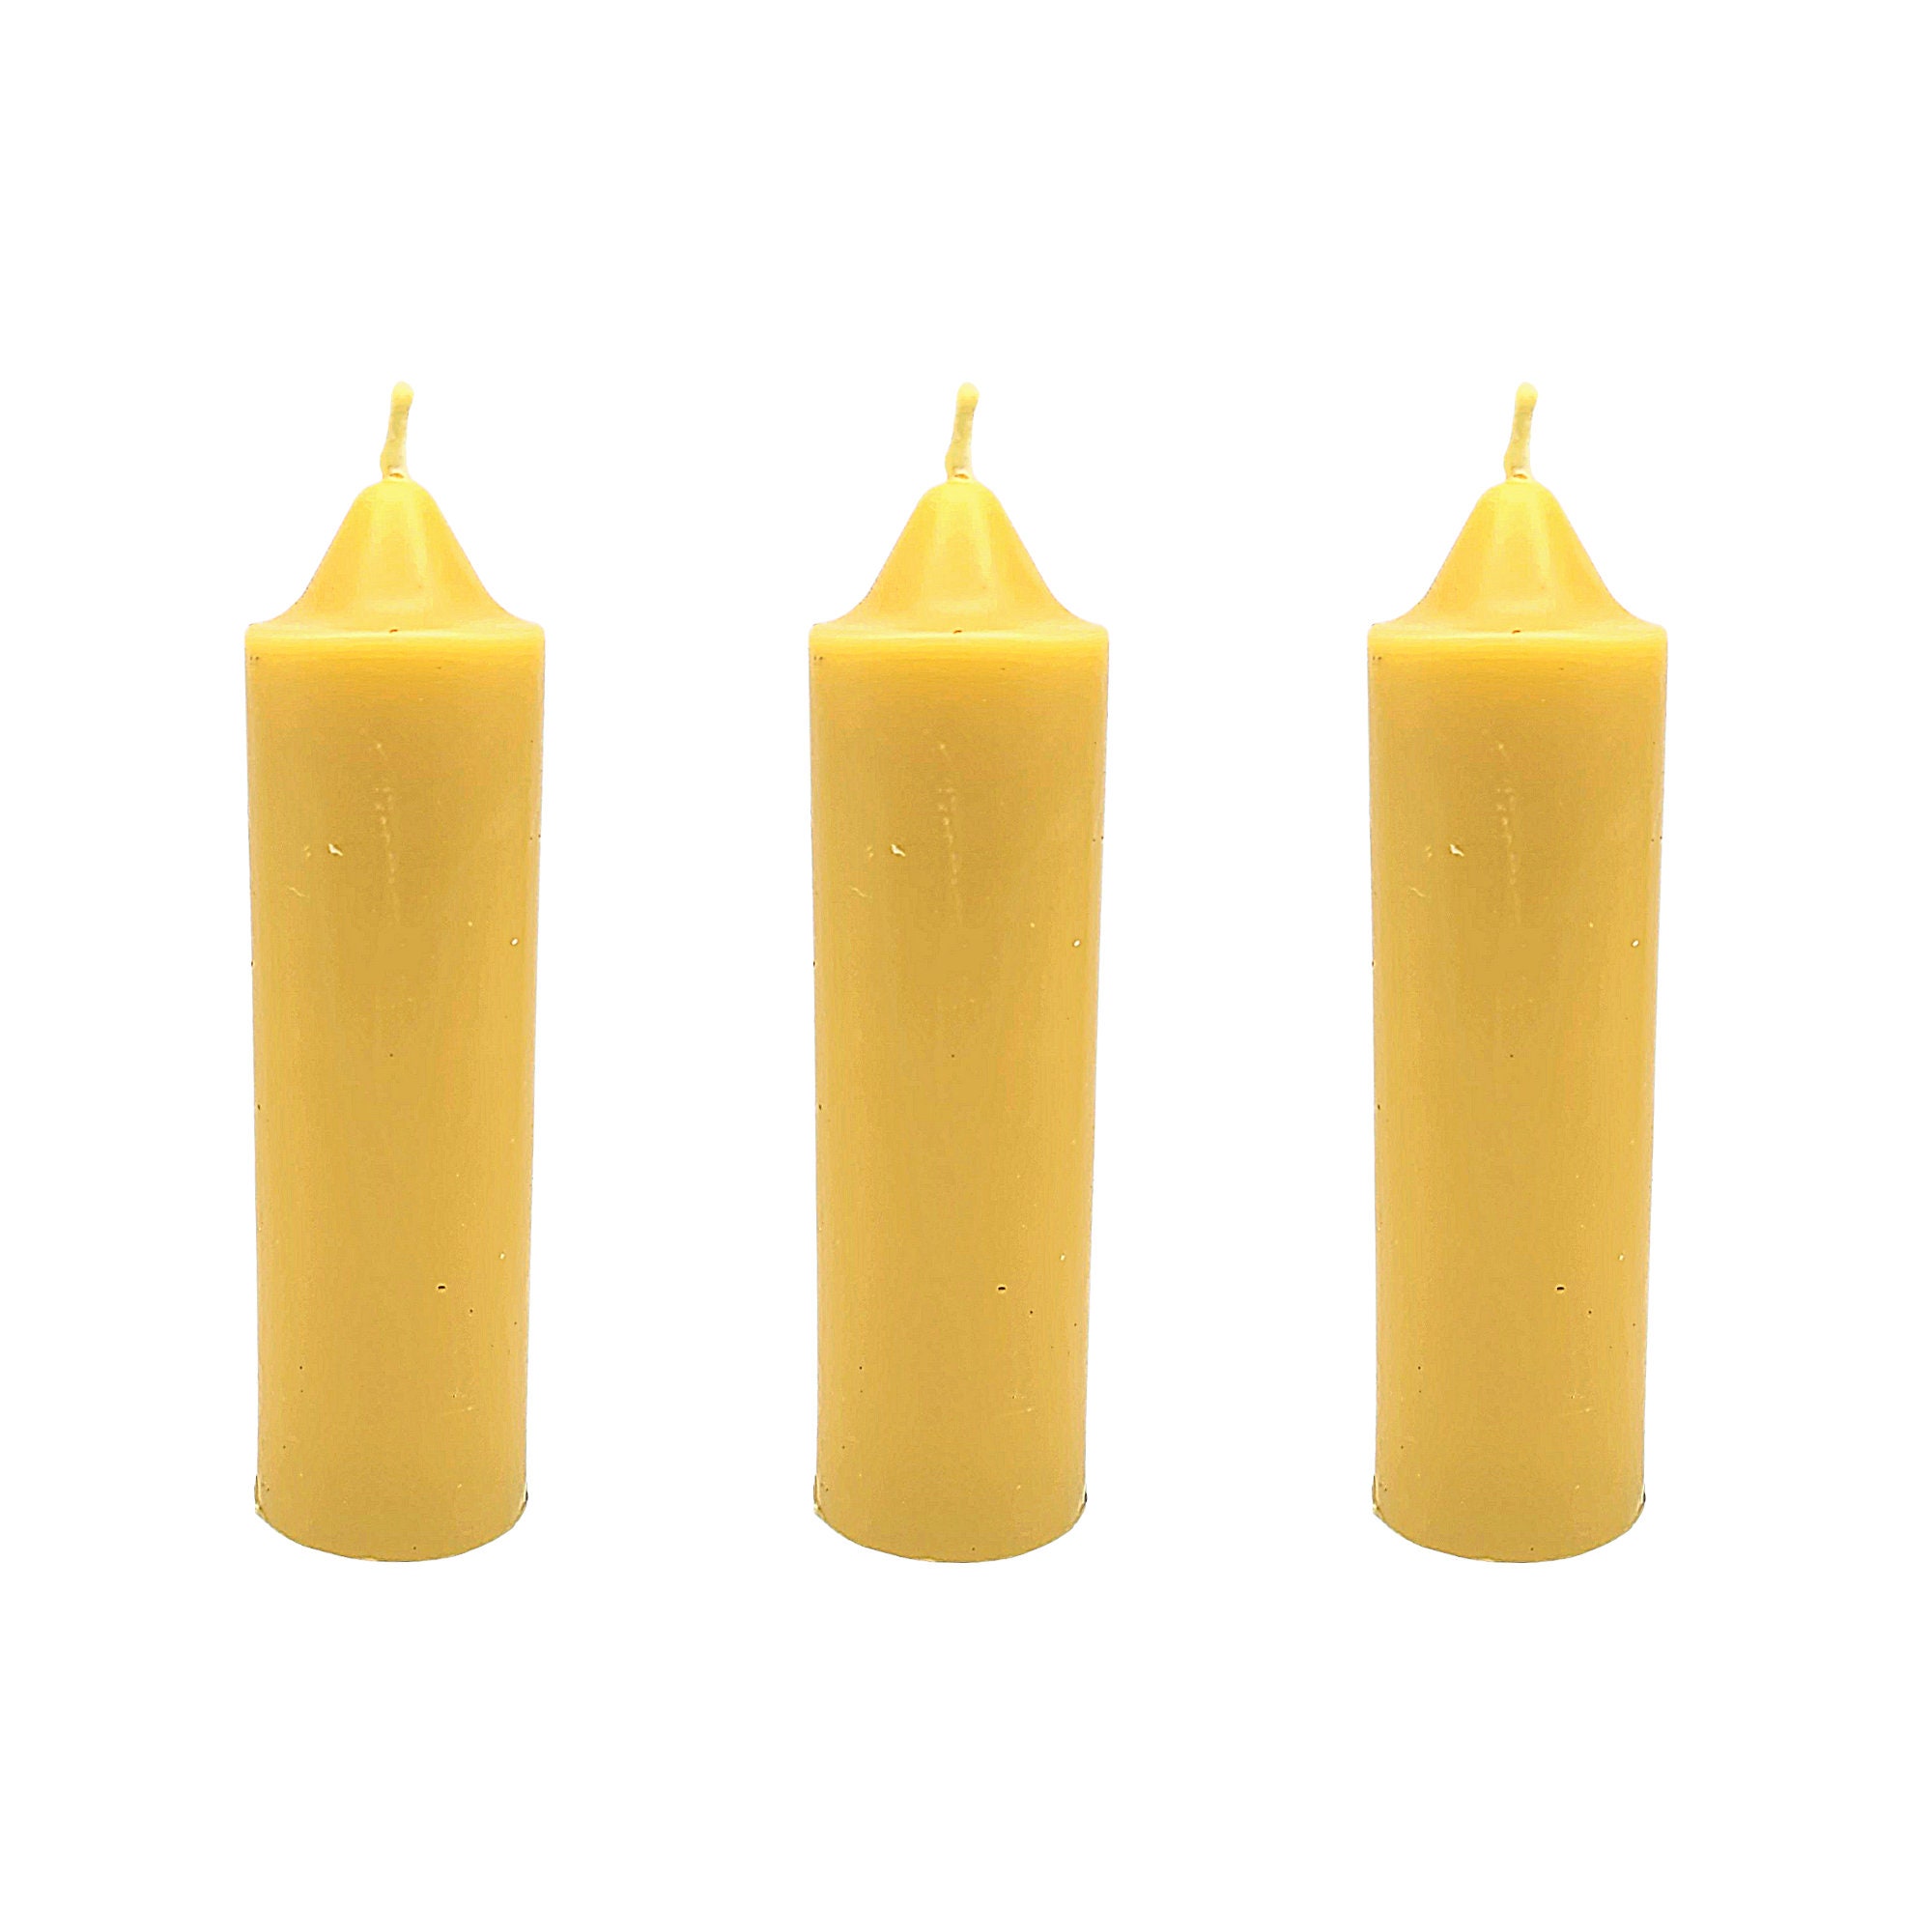 Colorful Beeswax Sheets for Candle Making Organic Beeswax Candle